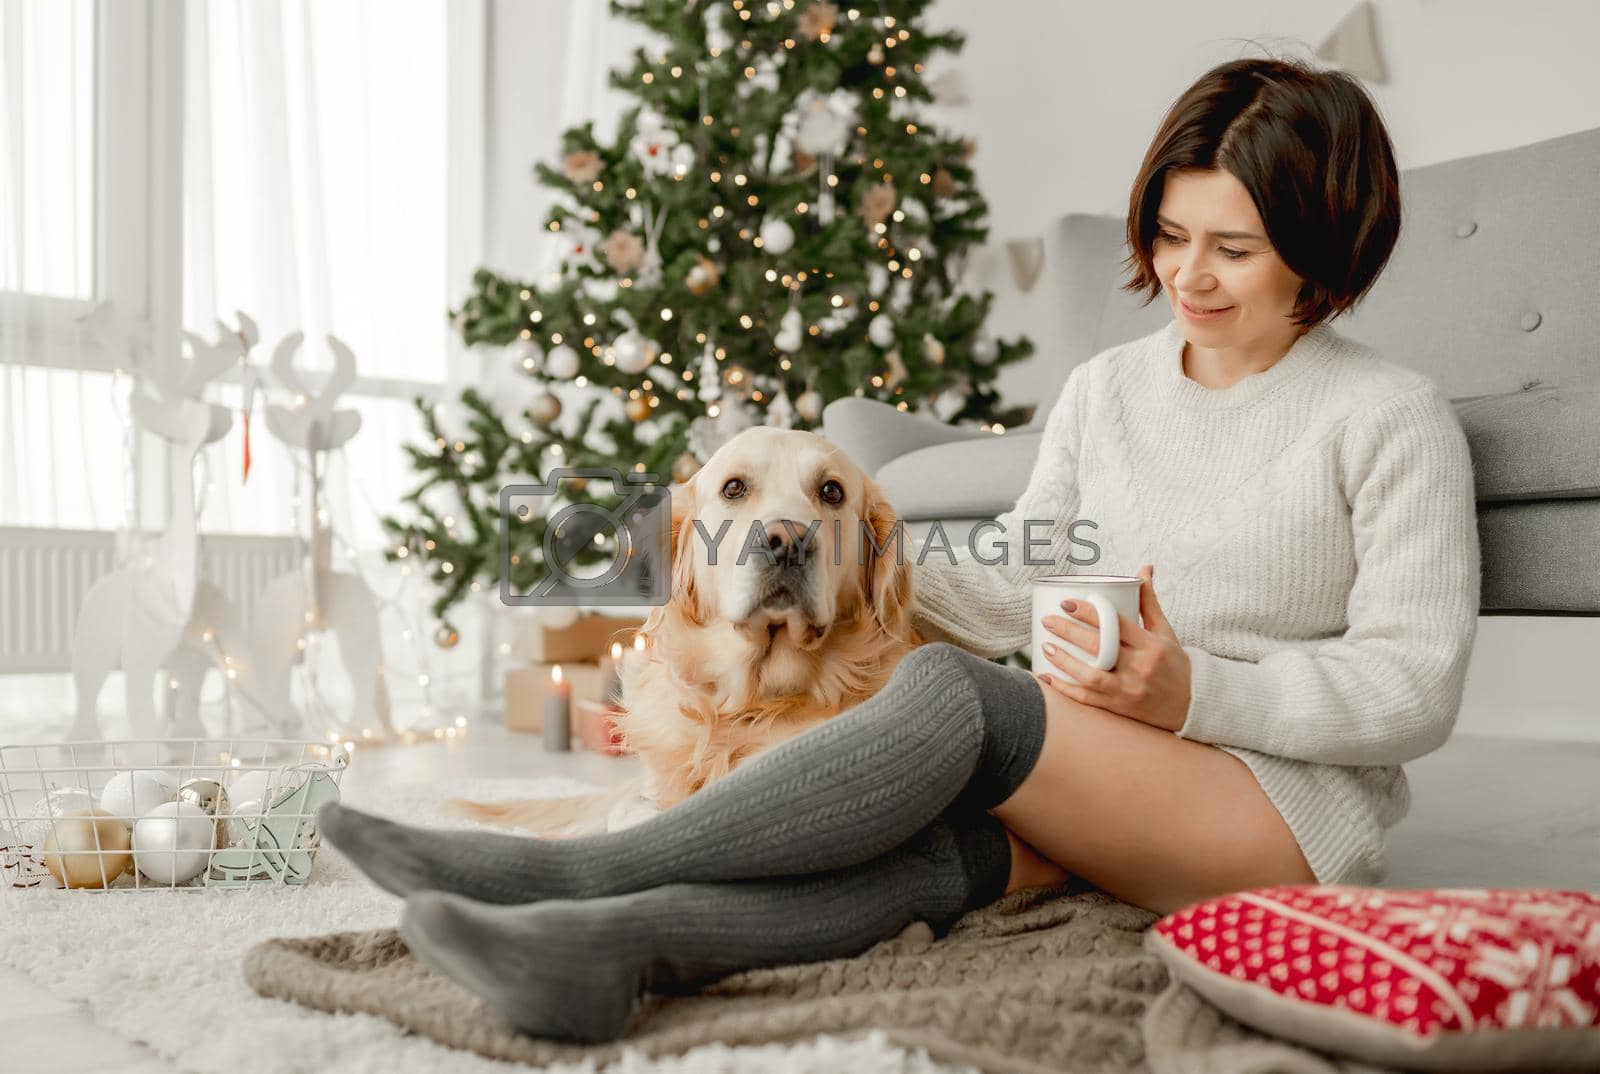 Royalty free image of Girl with cocoa and golden retriever dog by tan4ikk1